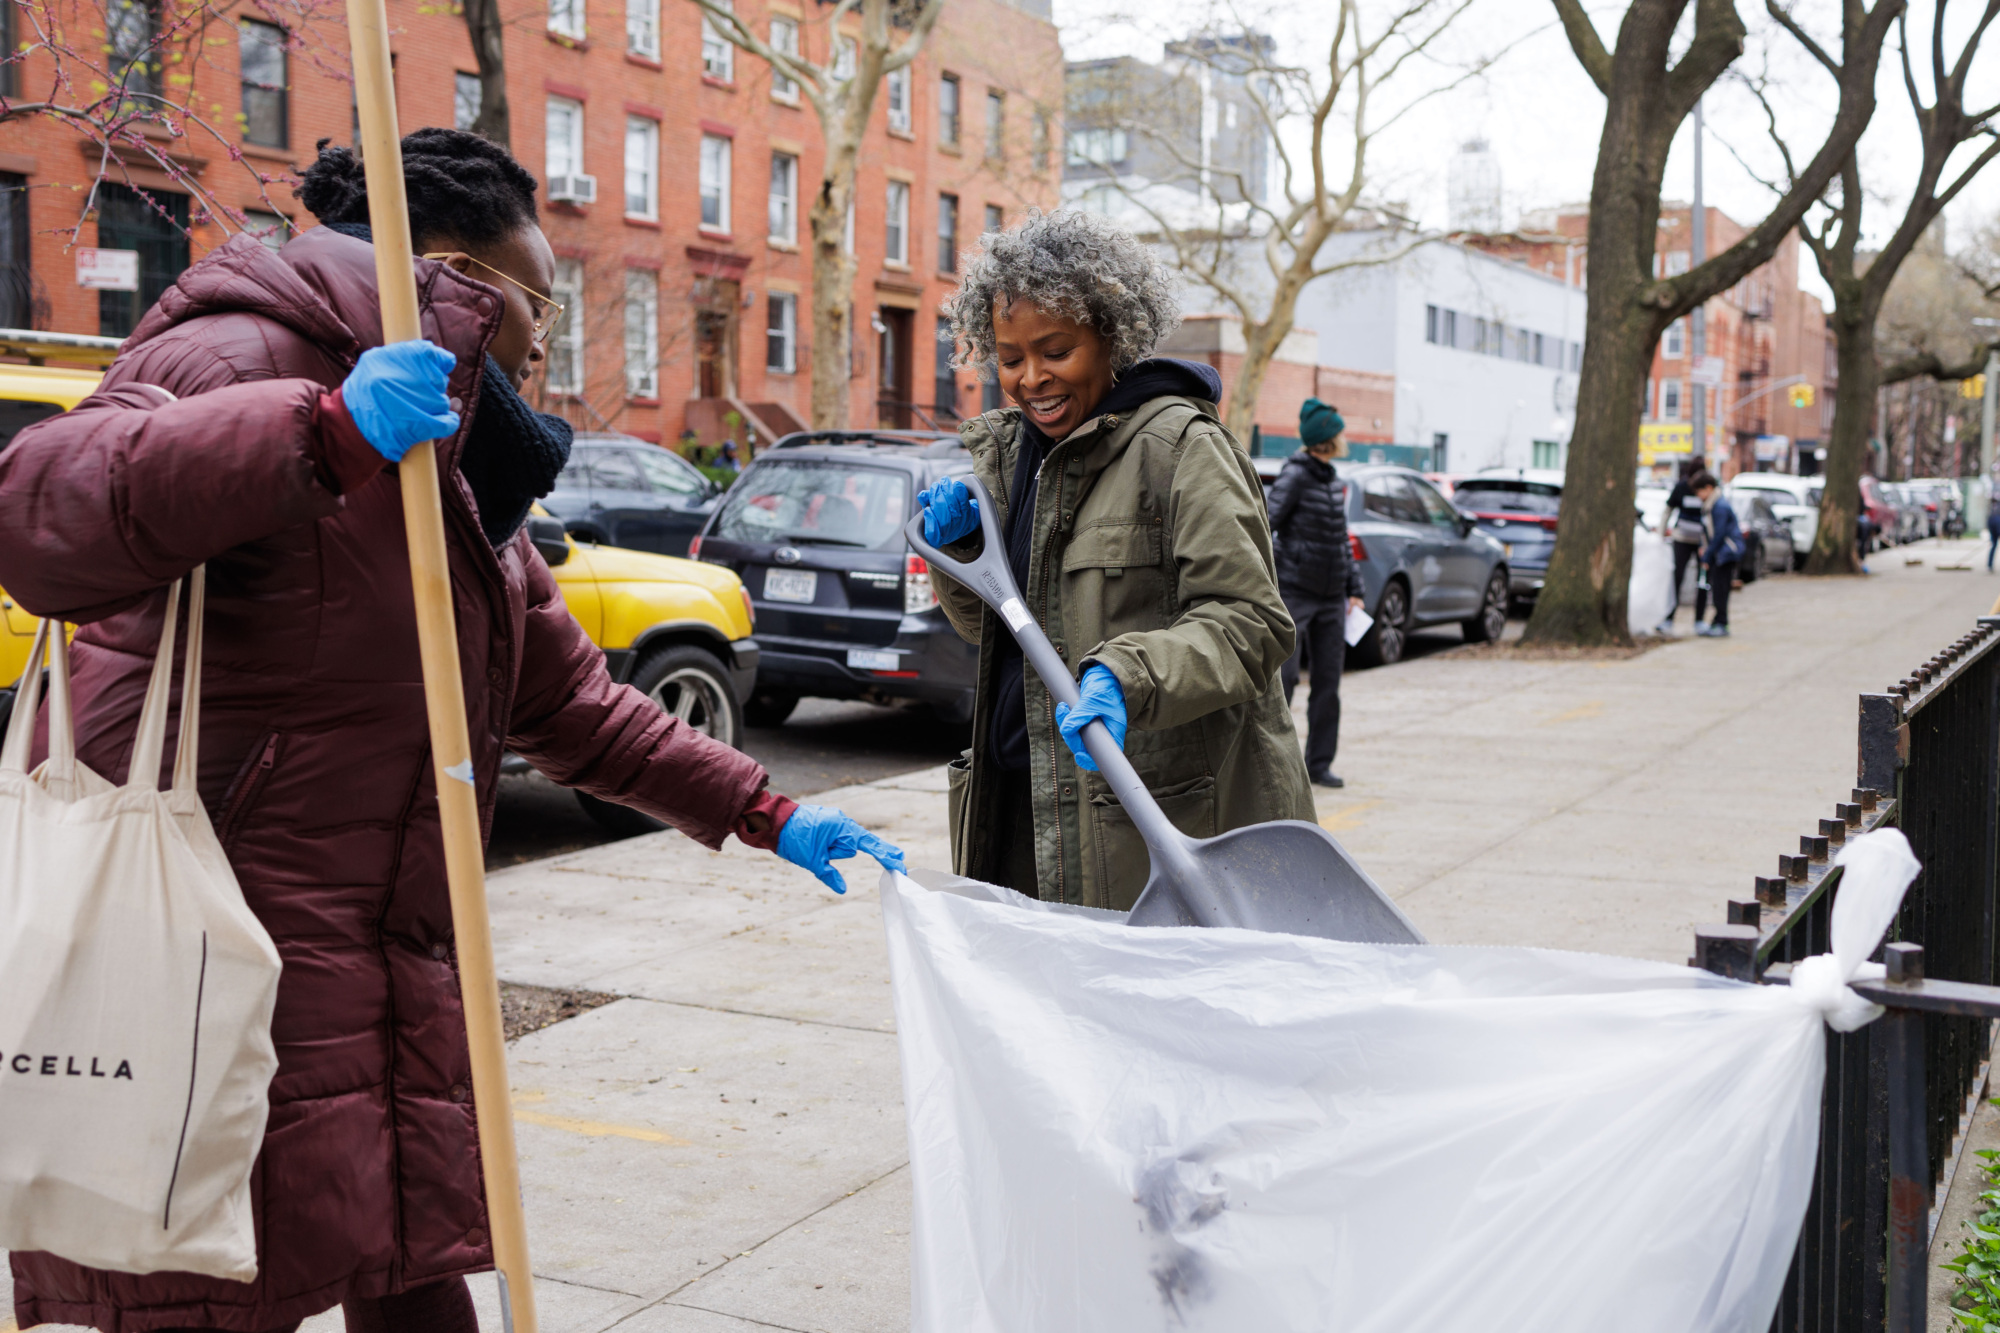 Two people with gloves on smiling as they collect litter with a trash grabber and a bag on a city street.